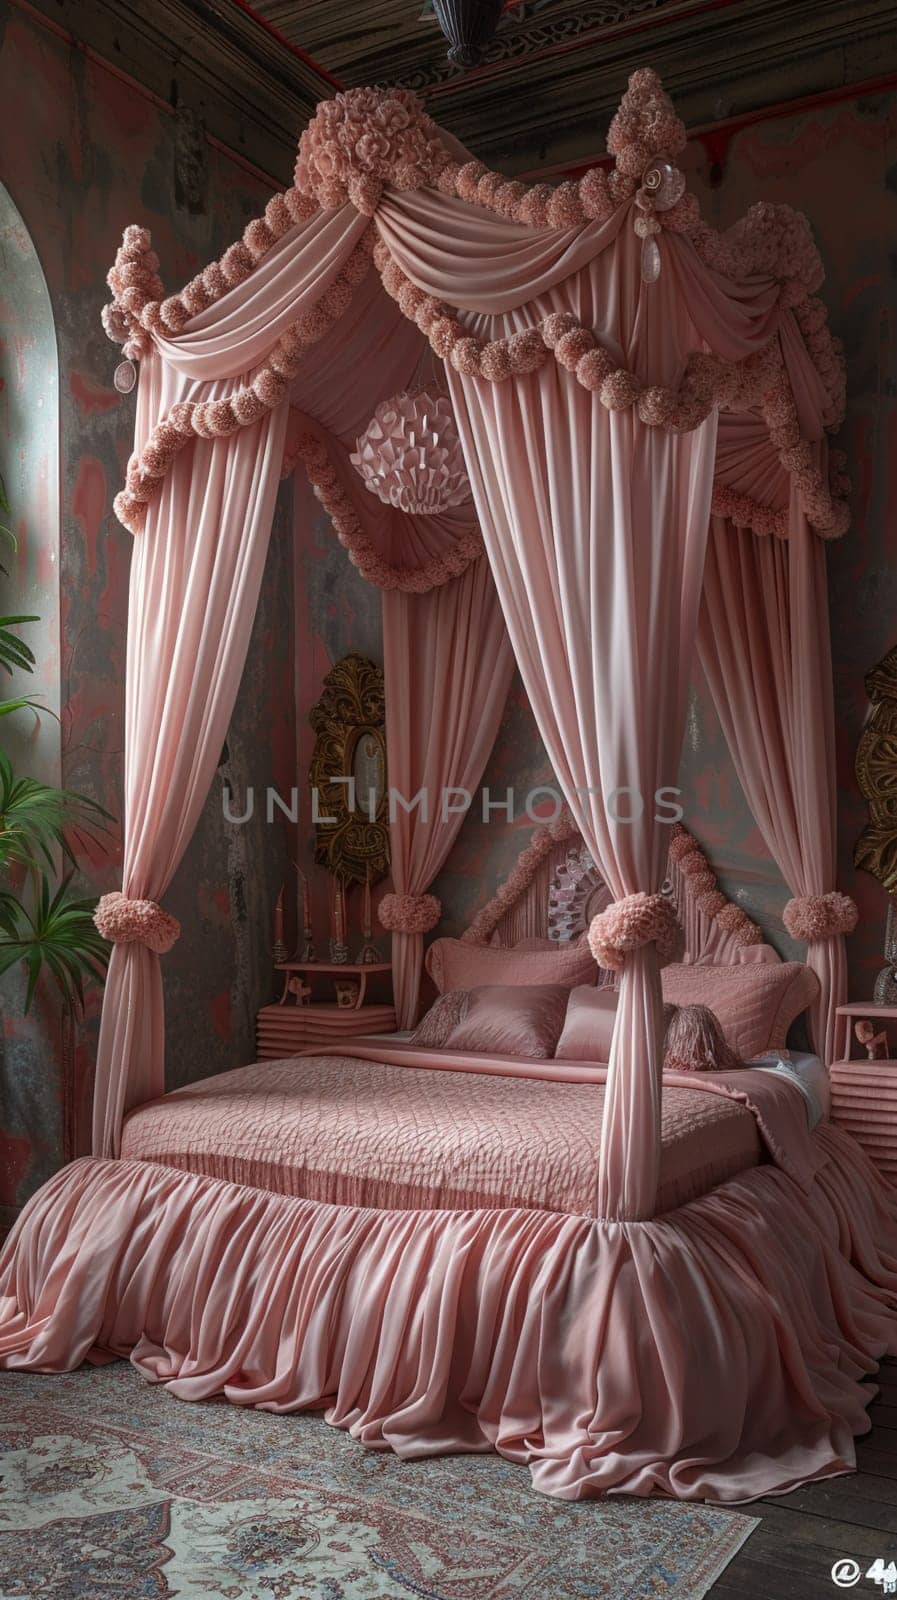 Fairy-tale princess bedroom with a canopy bed and whimsical decor by Benzoix